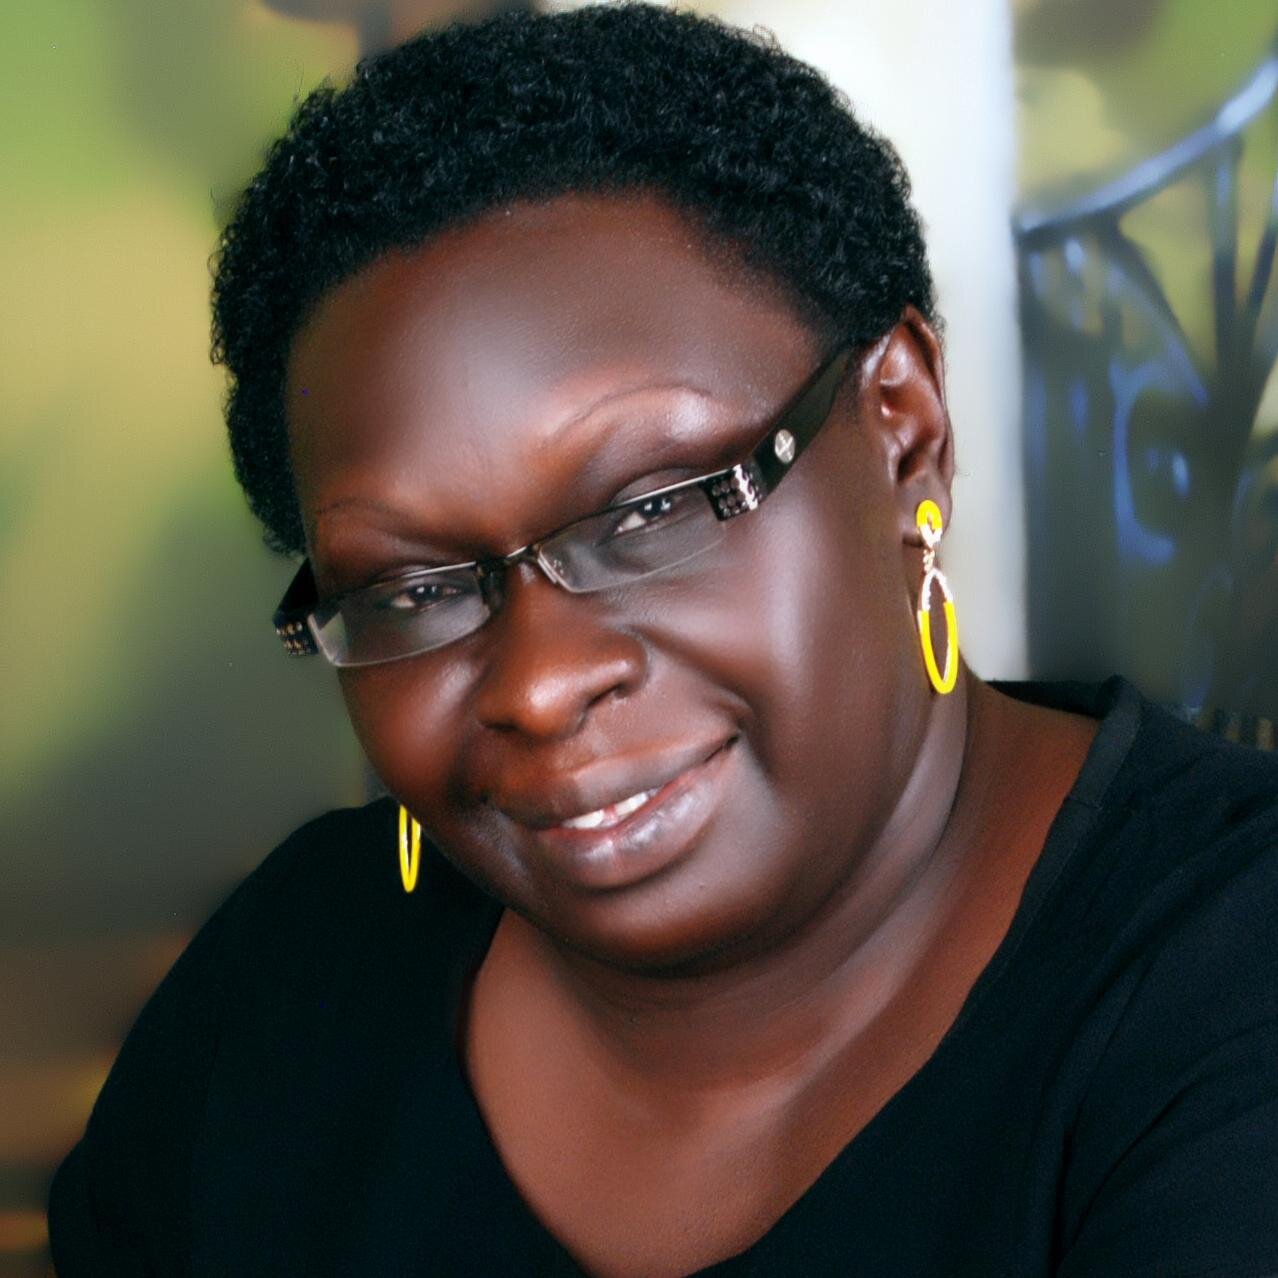 gender and development consultant and lecturer, Makerere university school of women and gender studies, kampala